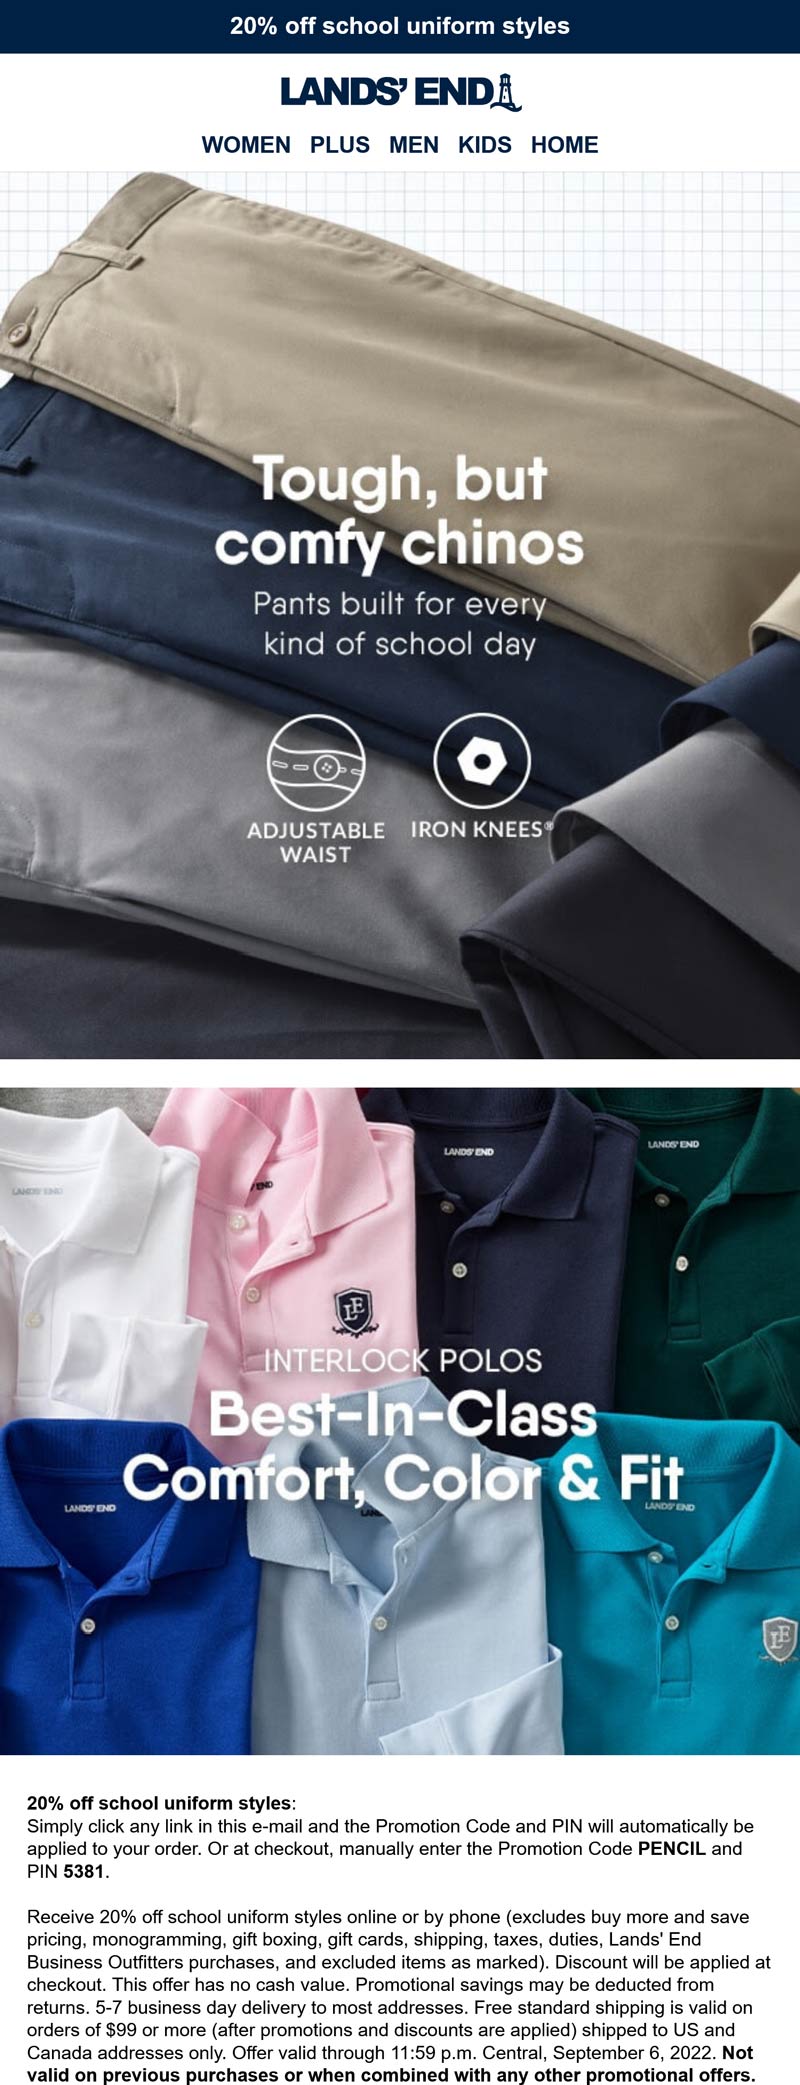 Lands End stores Coupon  20% off school uniform styles at Lands End via promo code PENCIL and pin 5381 #landsend 